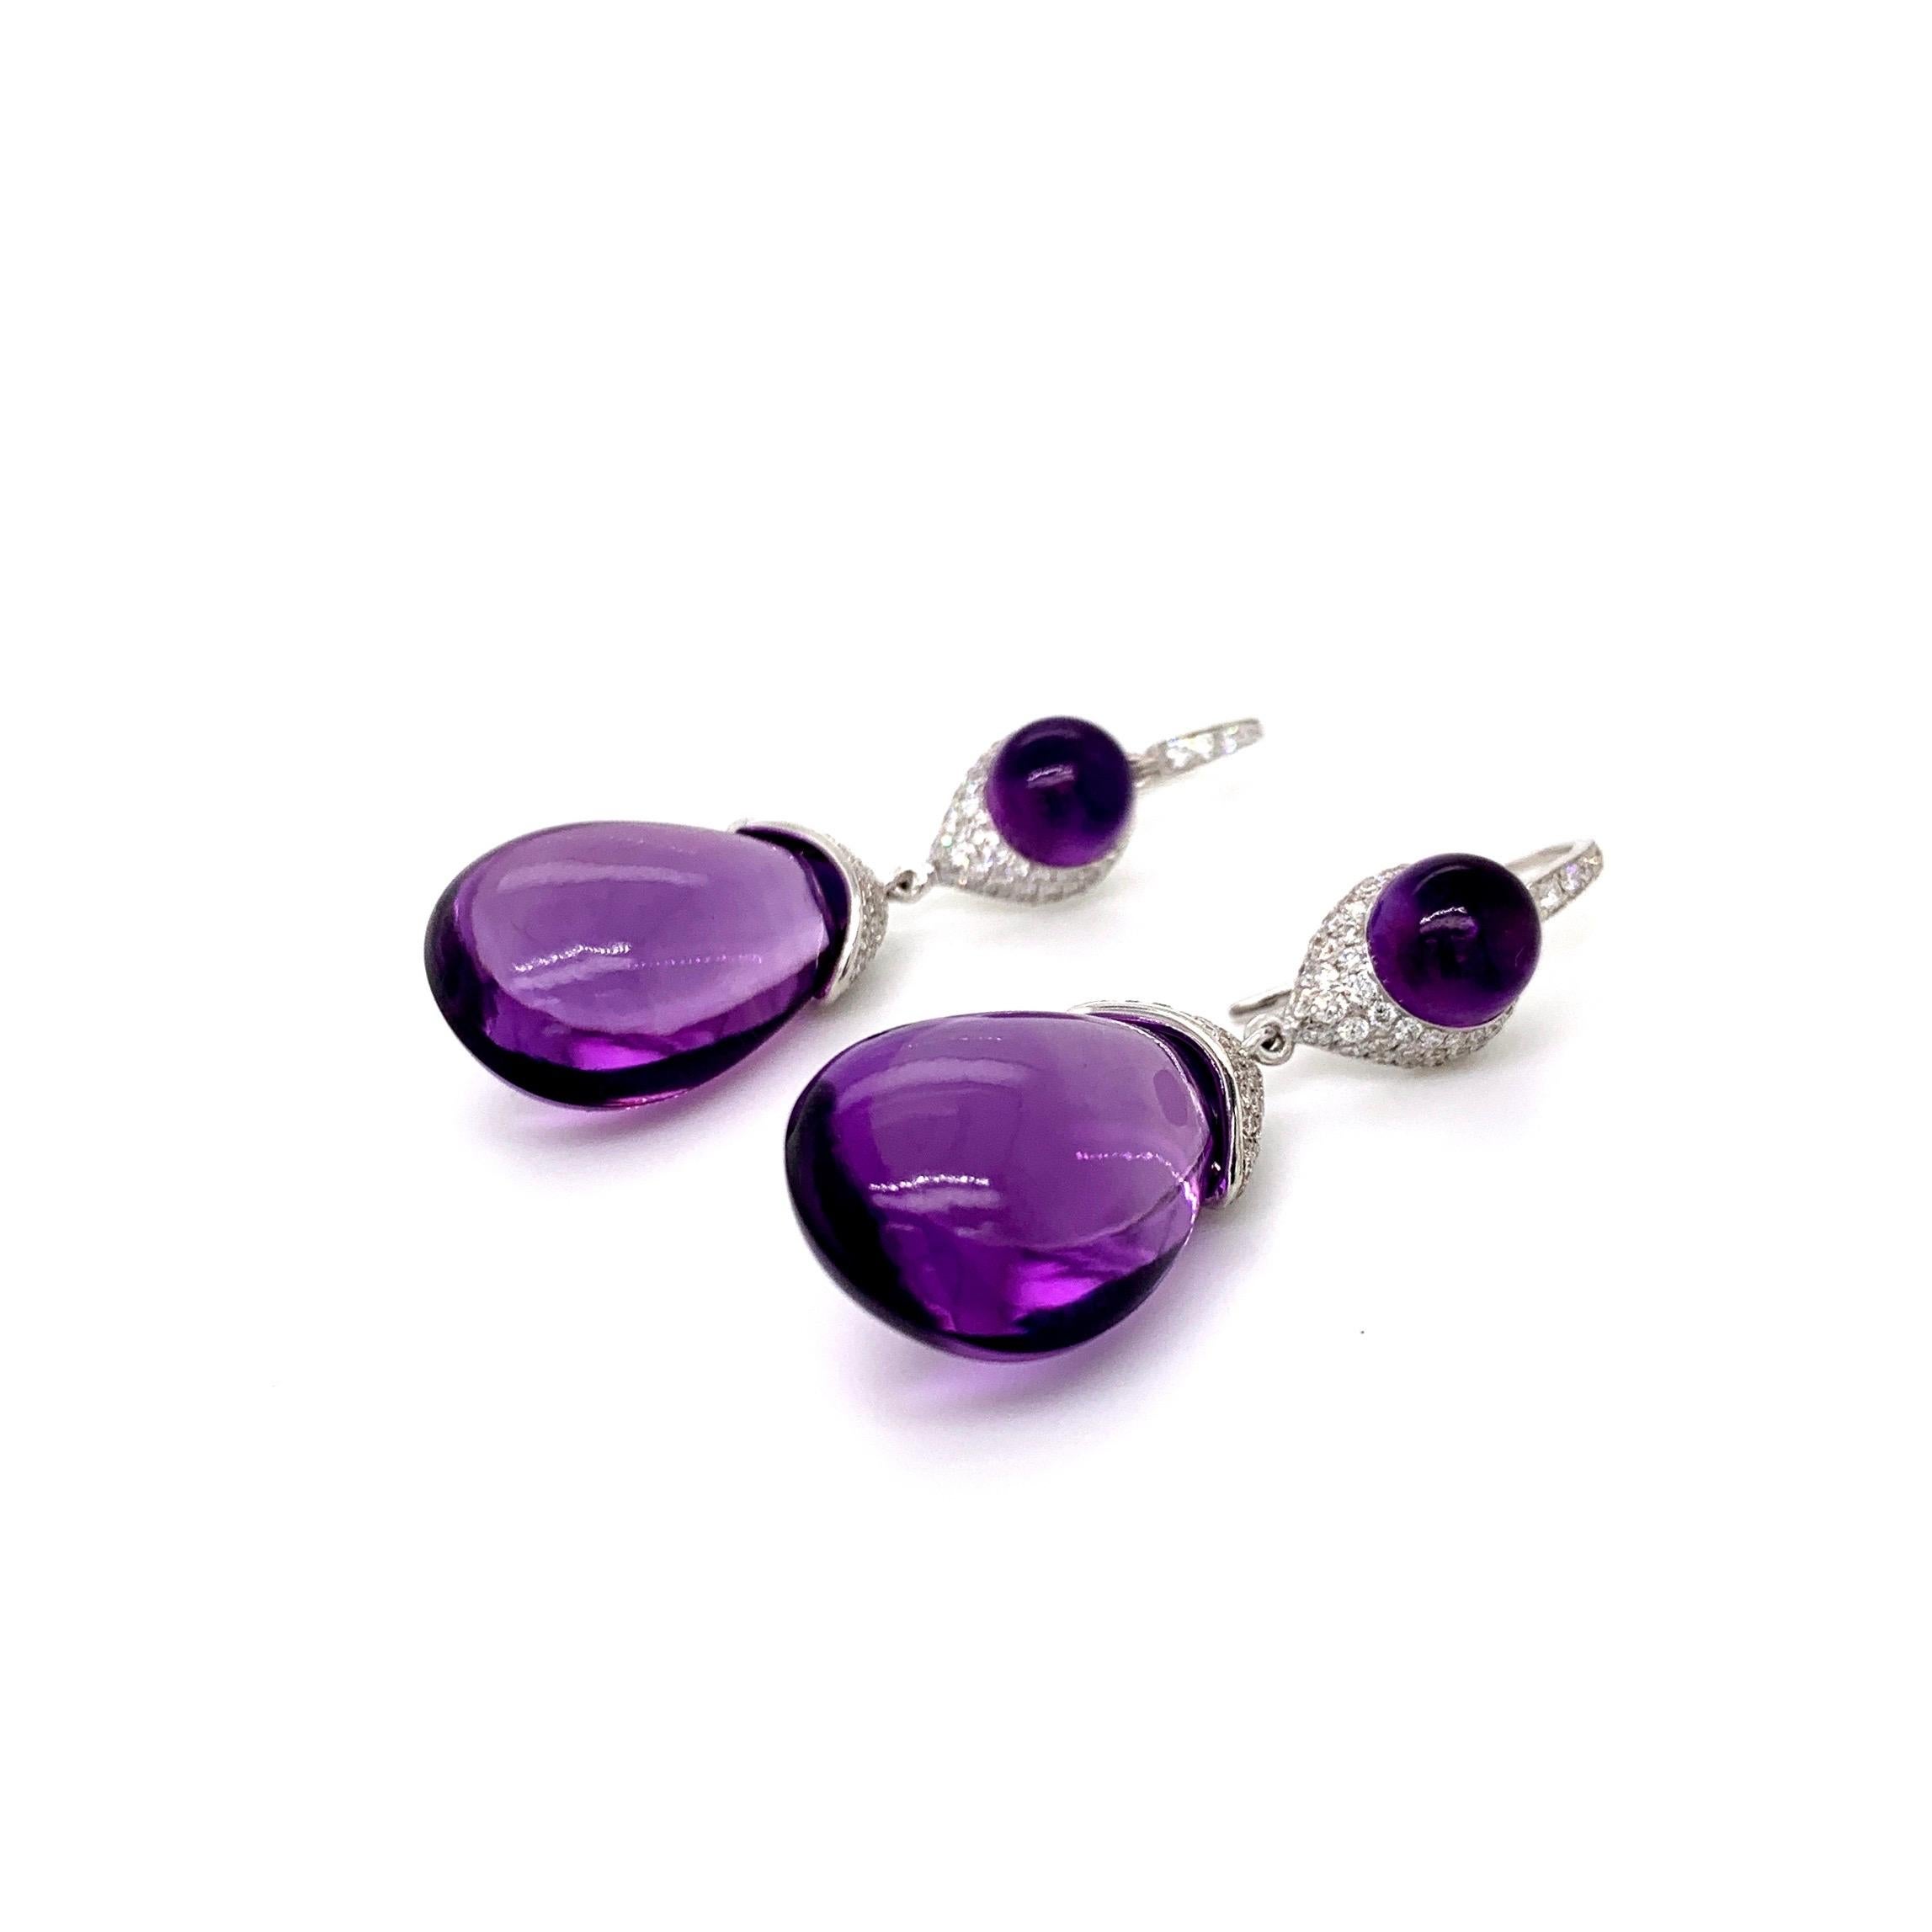 Beautiful pair of dangling diamond earrings with stunning amethyst drops.
Amethyst is a powerful and protective stone. Amethyst activates spiritual awareness, opens intuition and enhances psychic abilities. It has strong healing and cleansing